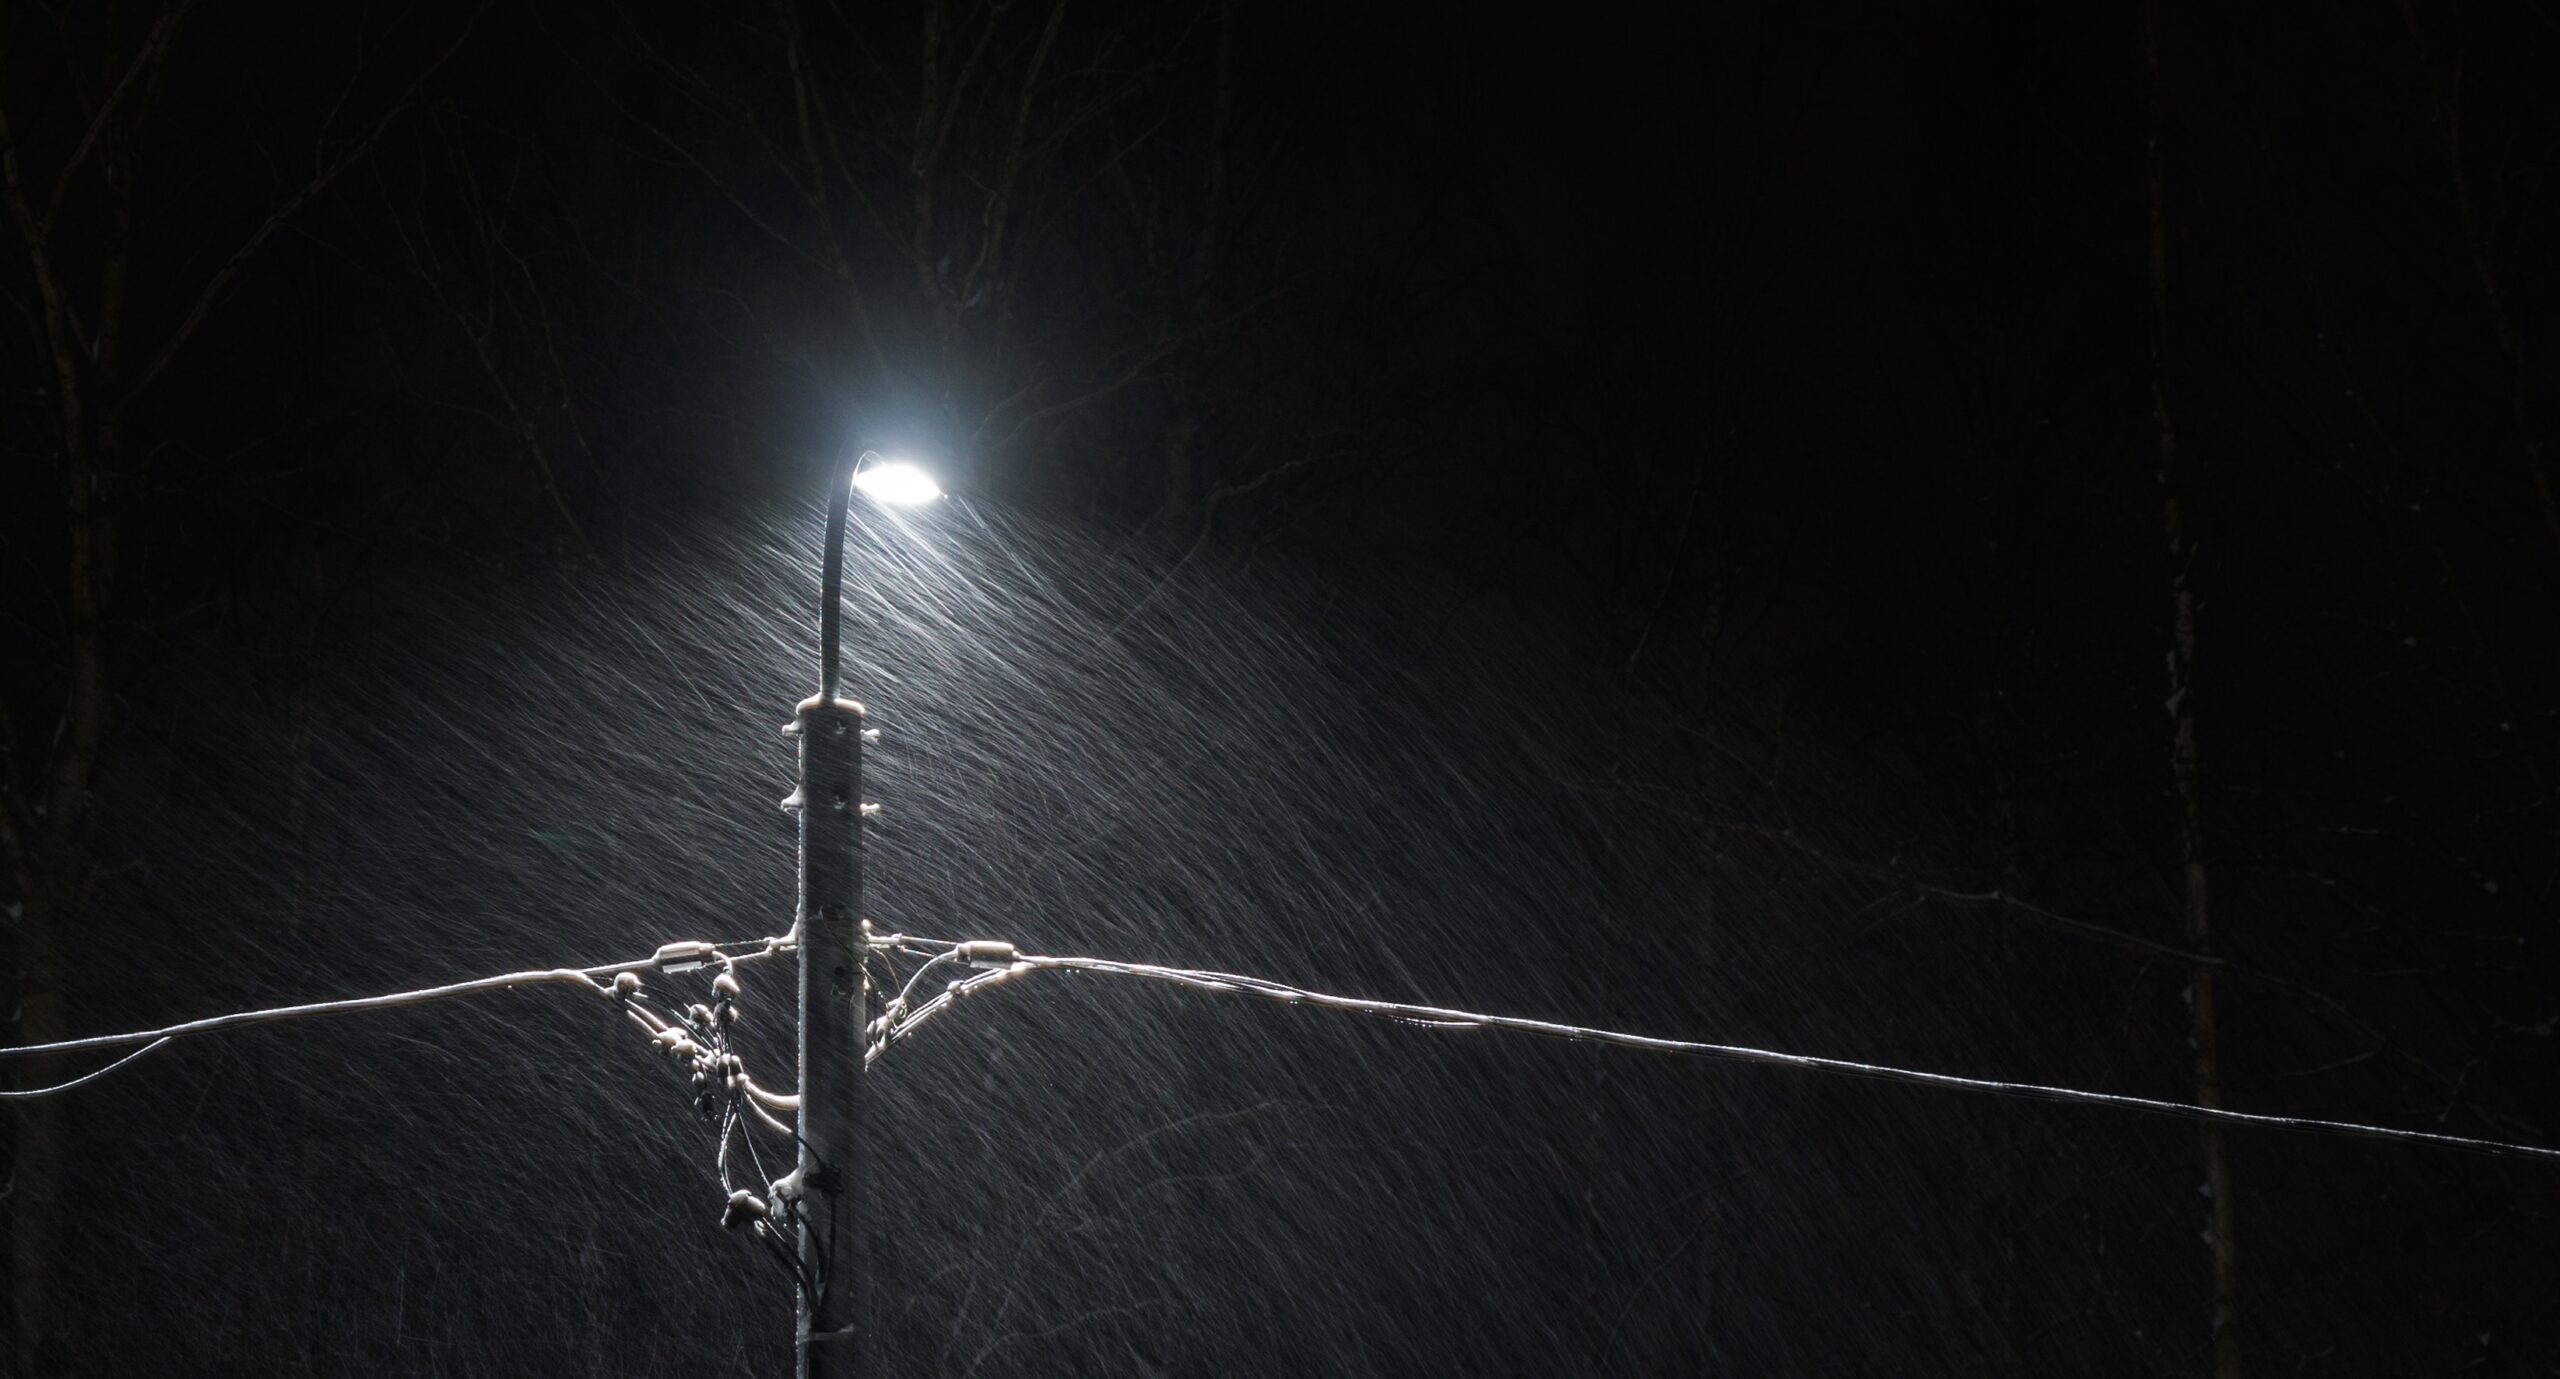 Texas’s grid may still be unprepared for the next big winter storm